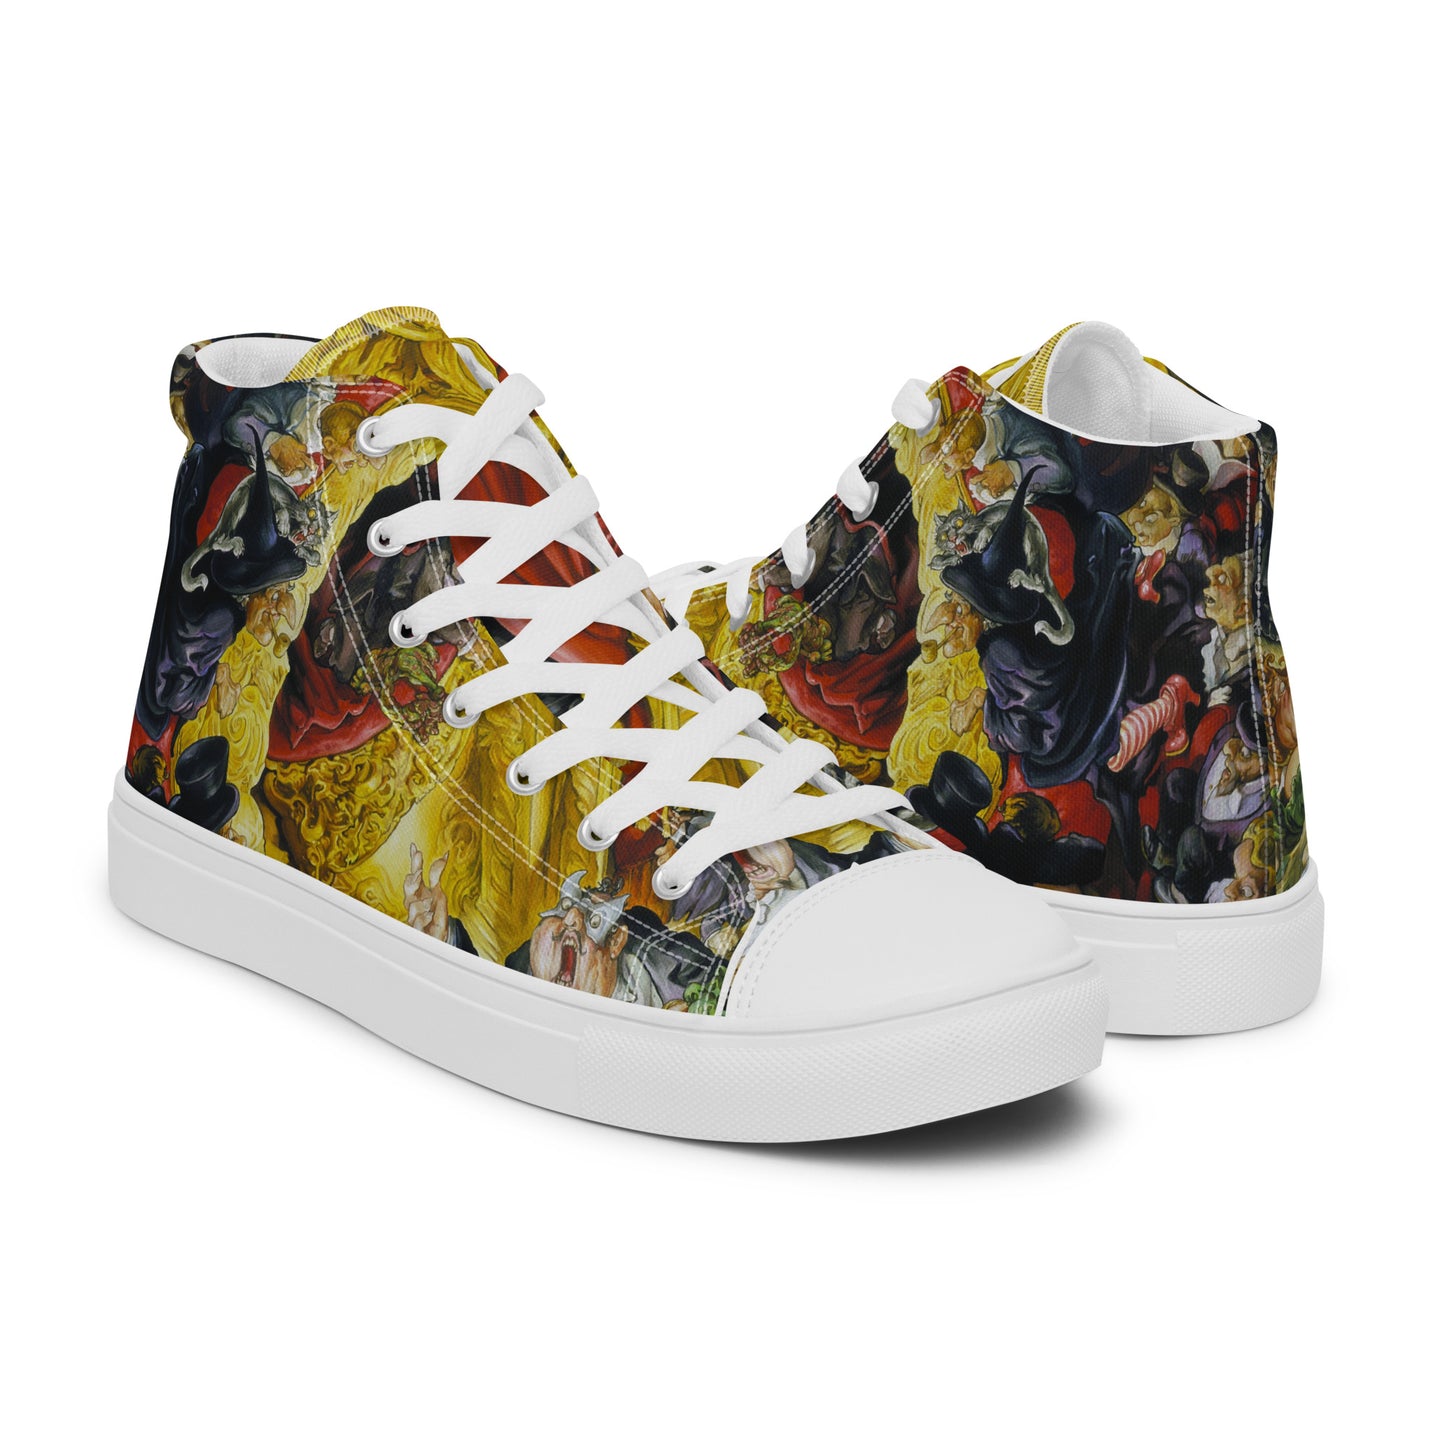 Maskerade Men's High Top Canvas Shoes - Free Shipping *US SIZES SHOWN! USE CHART!